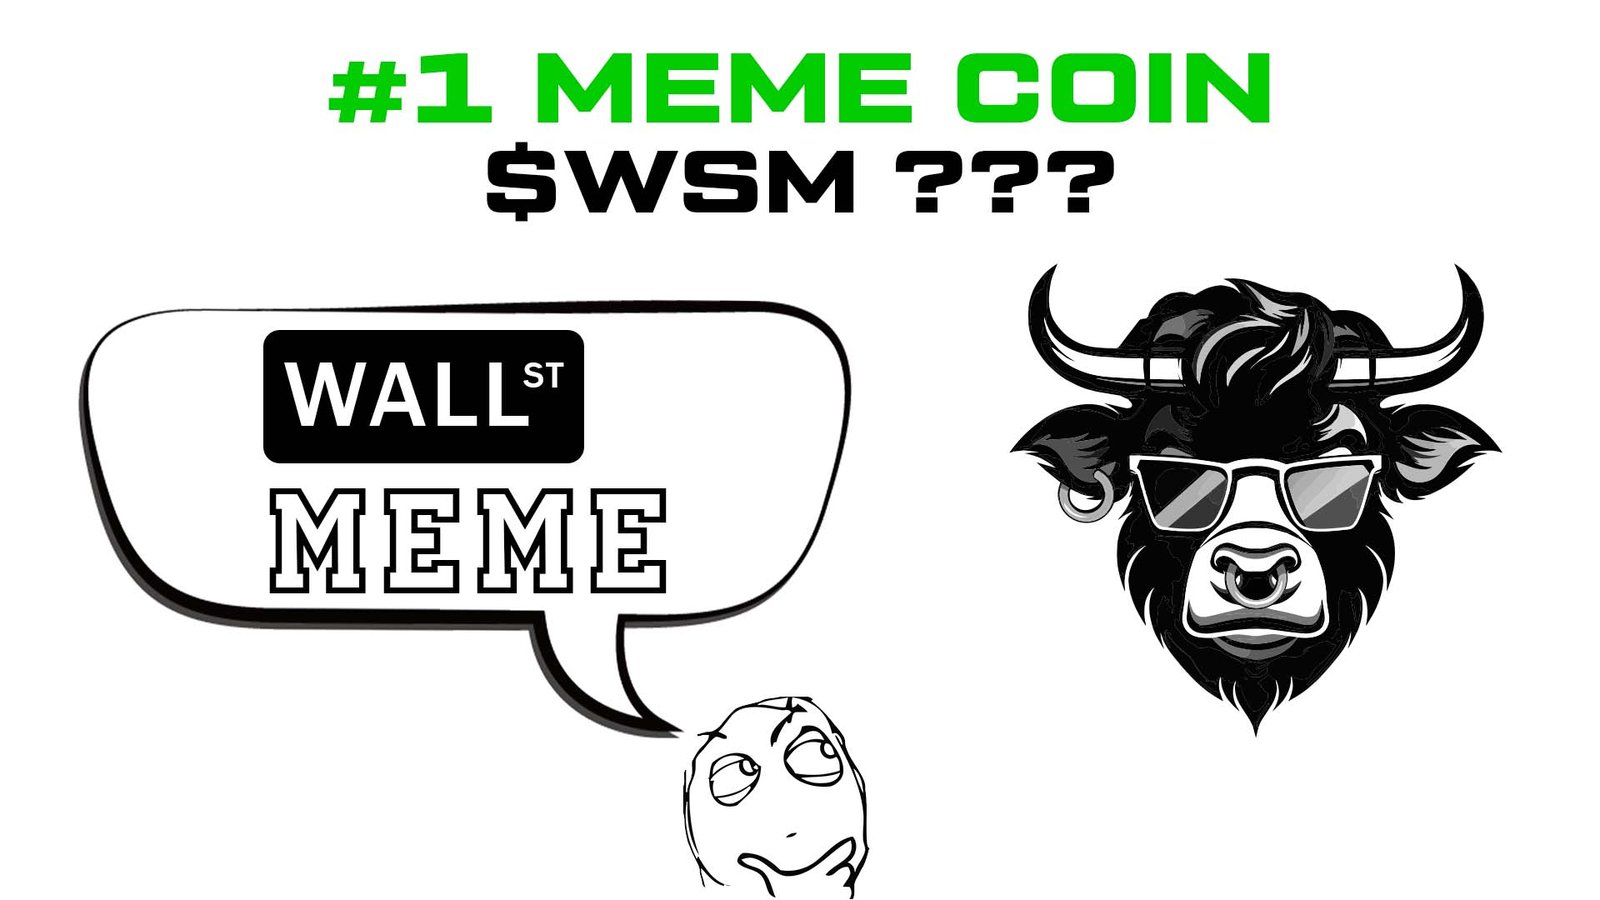 Will Wall Street Memes Coin ($WSM) Become No.1 Meme Coin? - Moneybinds